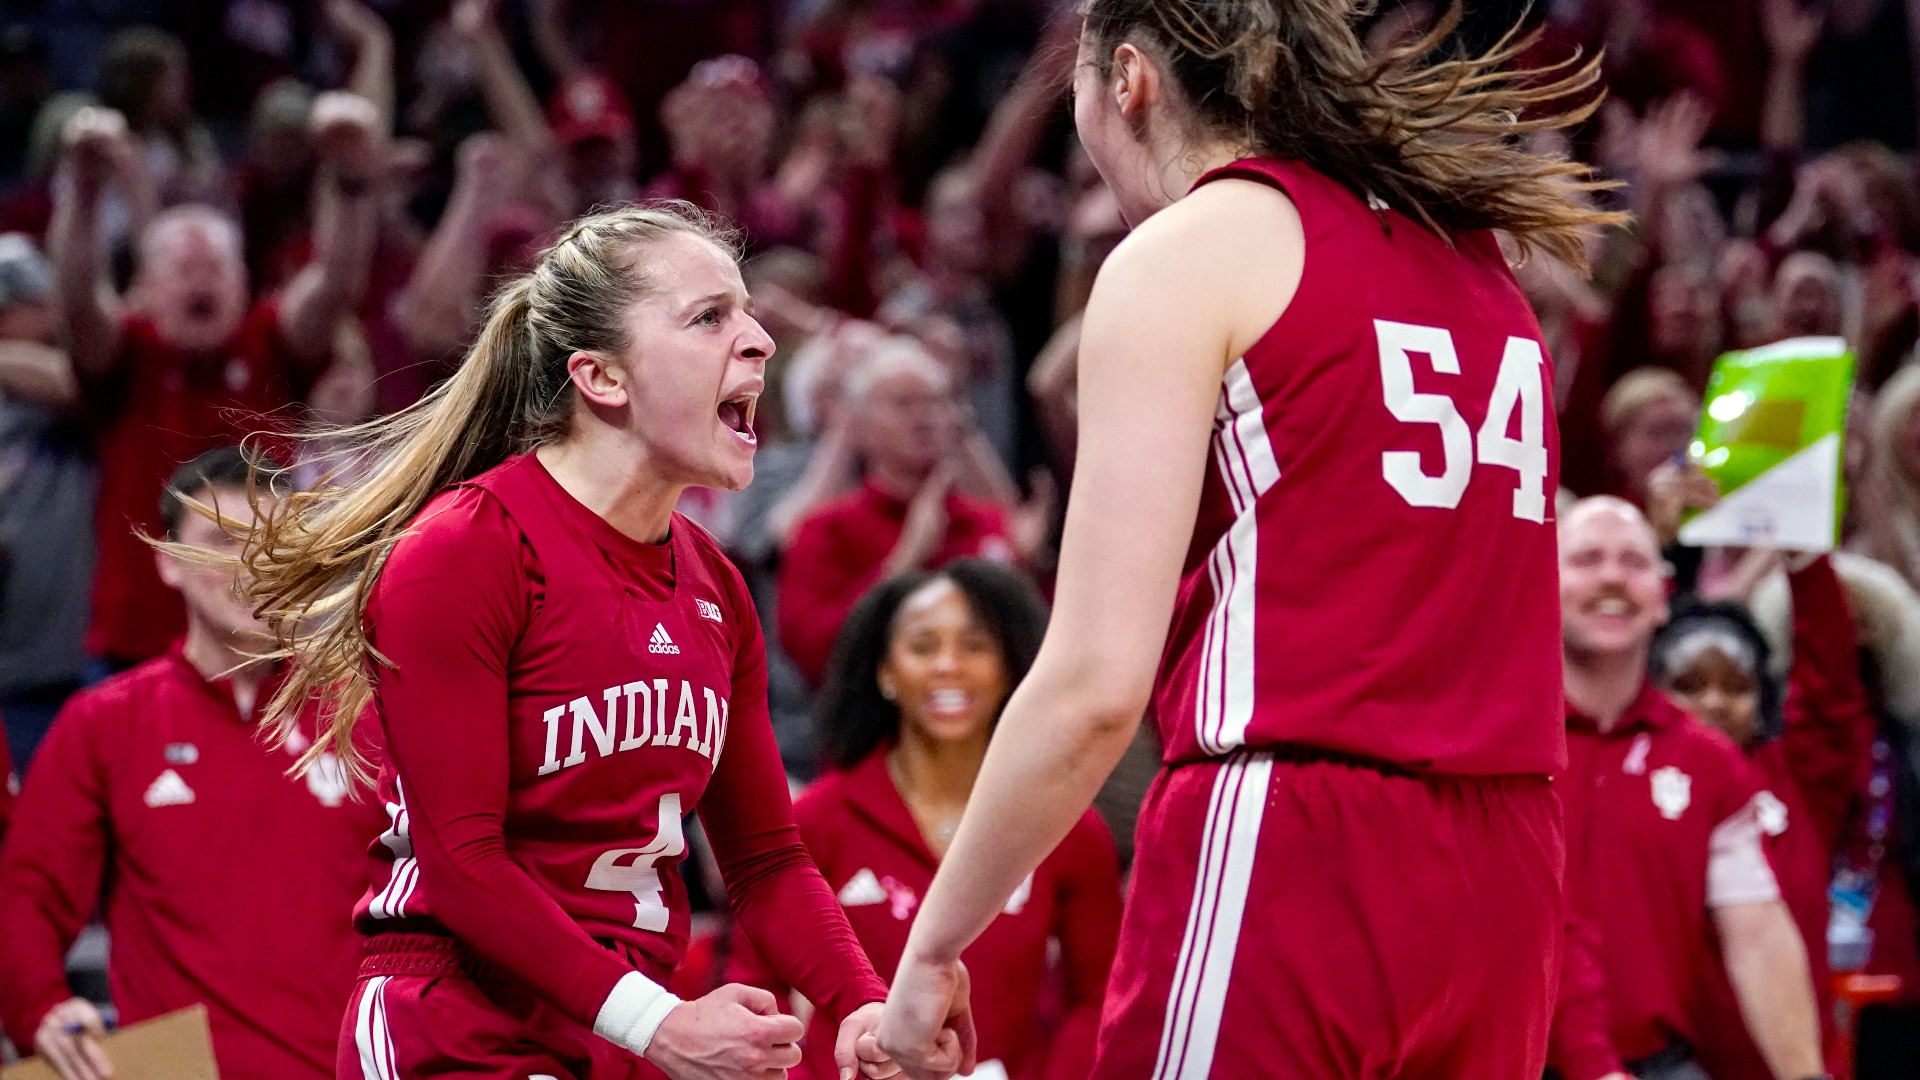 If the fifth-seeded Hoosiers win the championship game they will become the first team to win four straight to win the tournament.